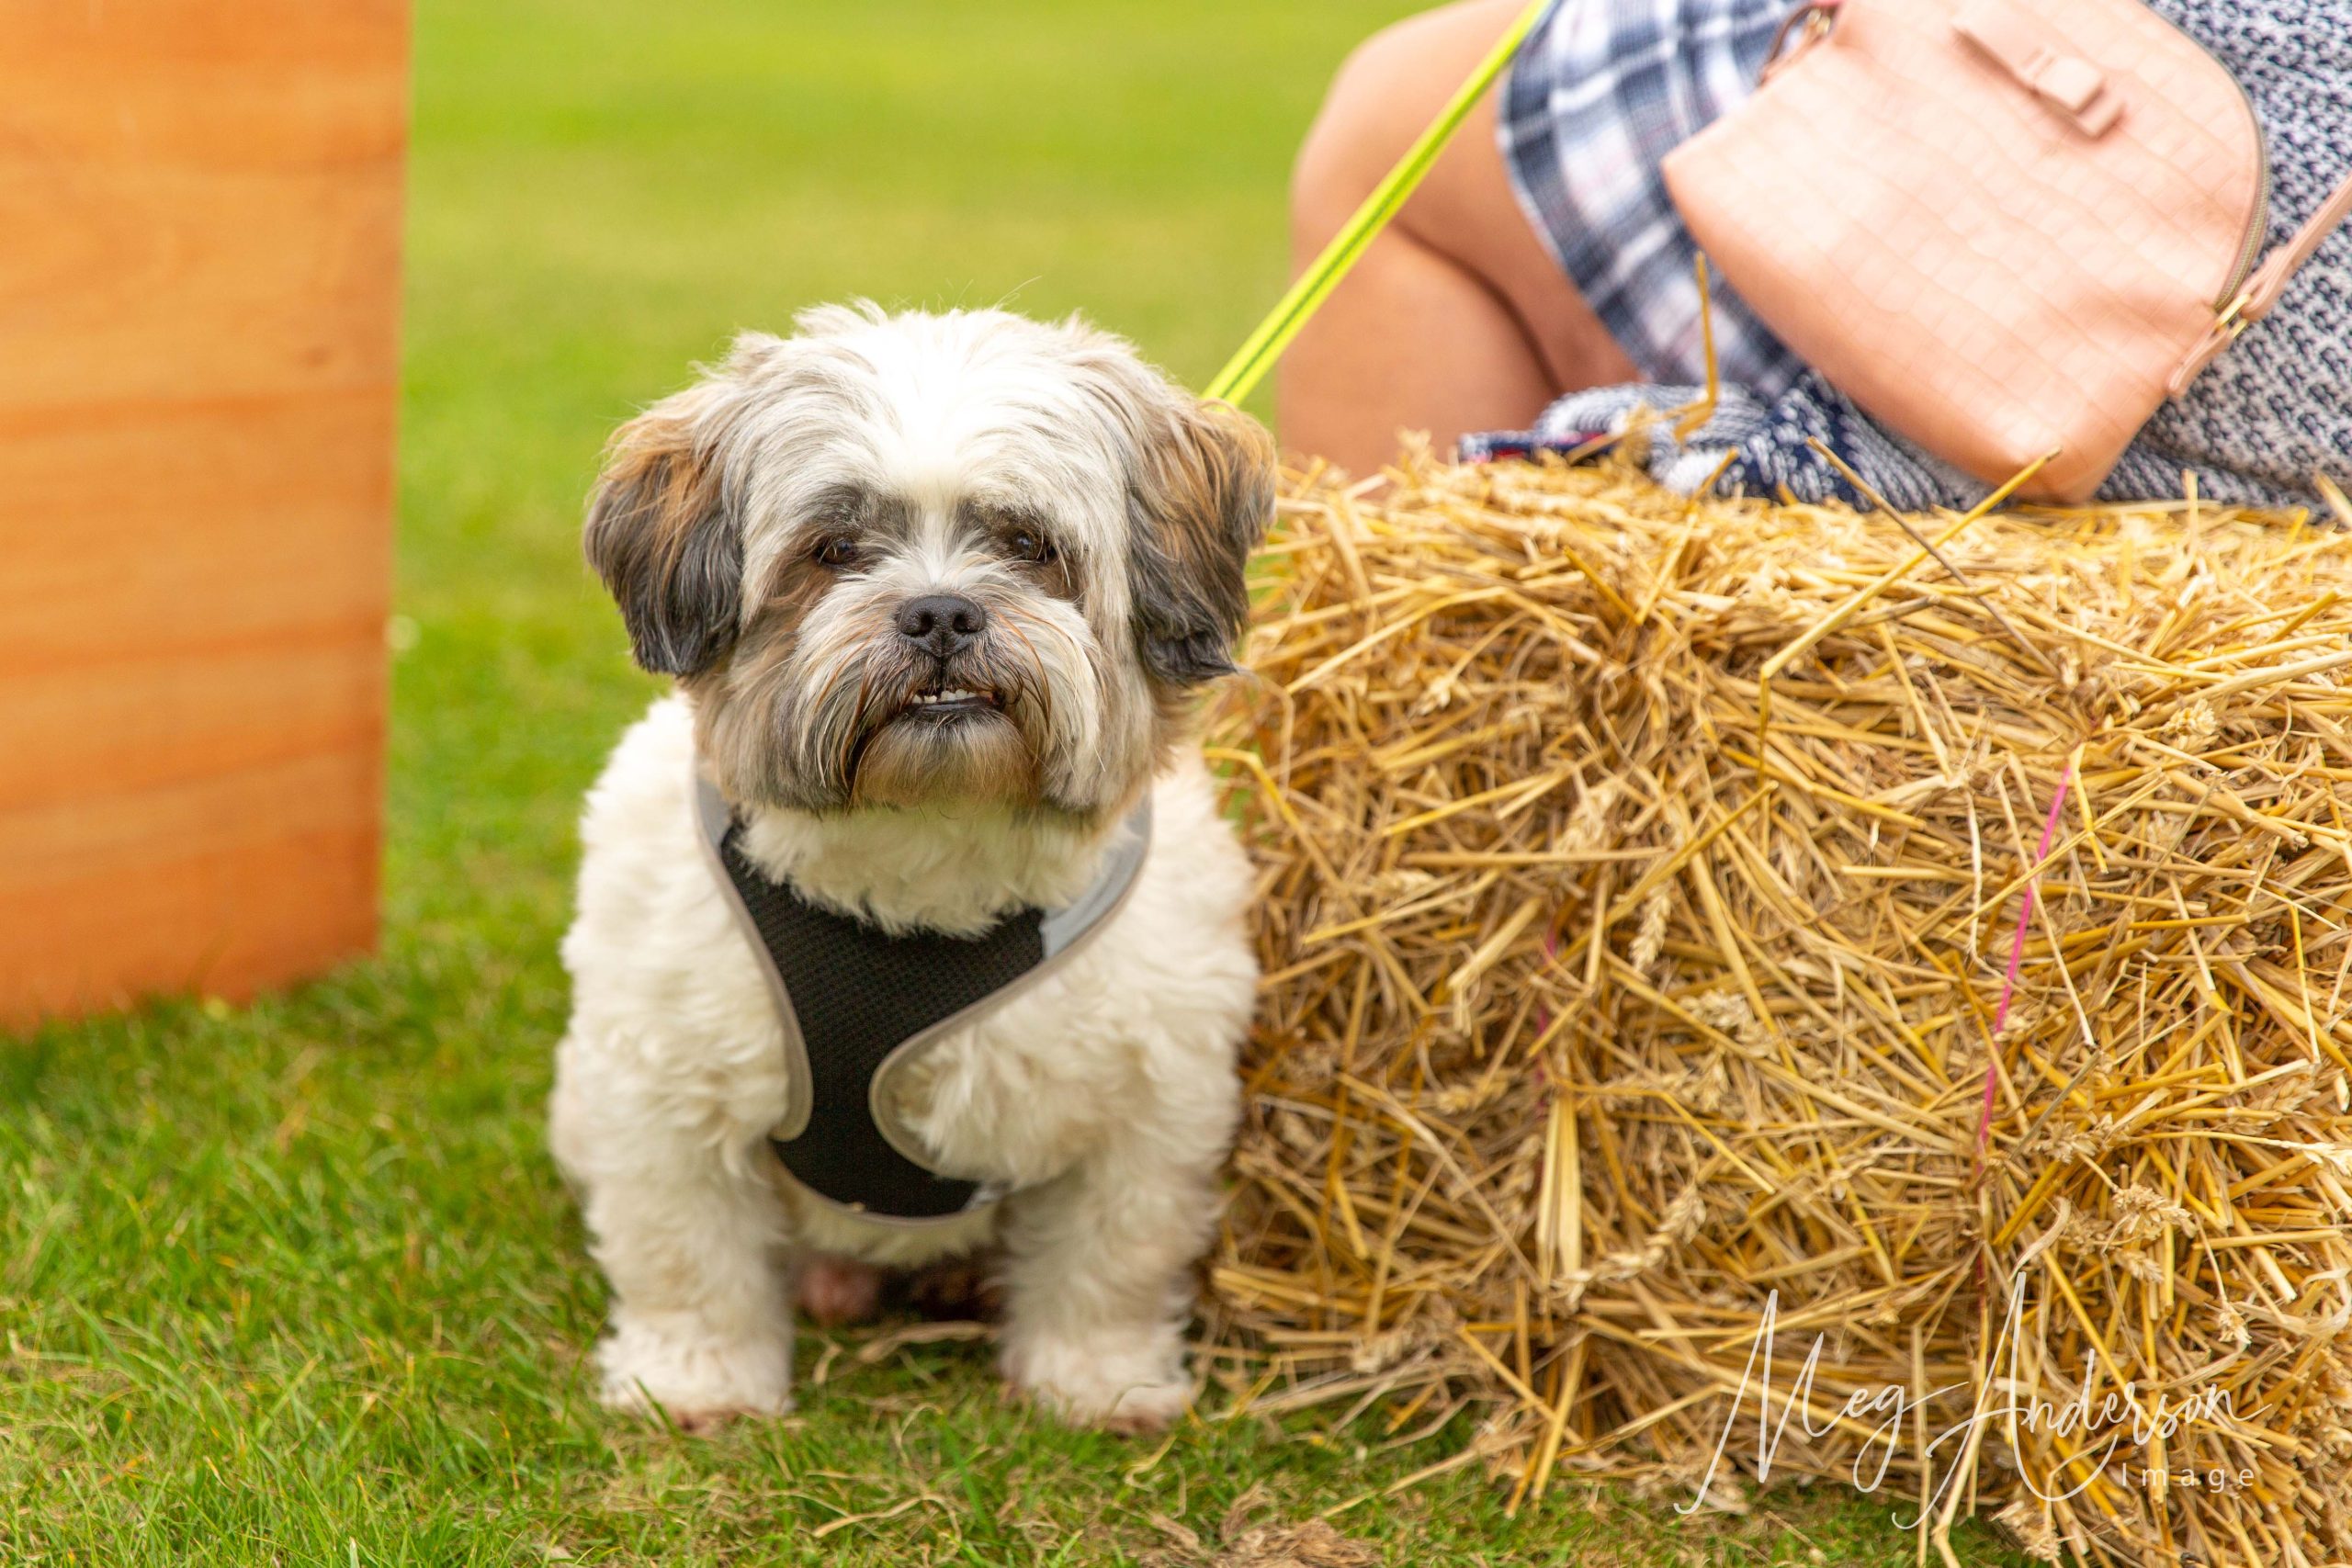 A small dog siting next to a hay bale